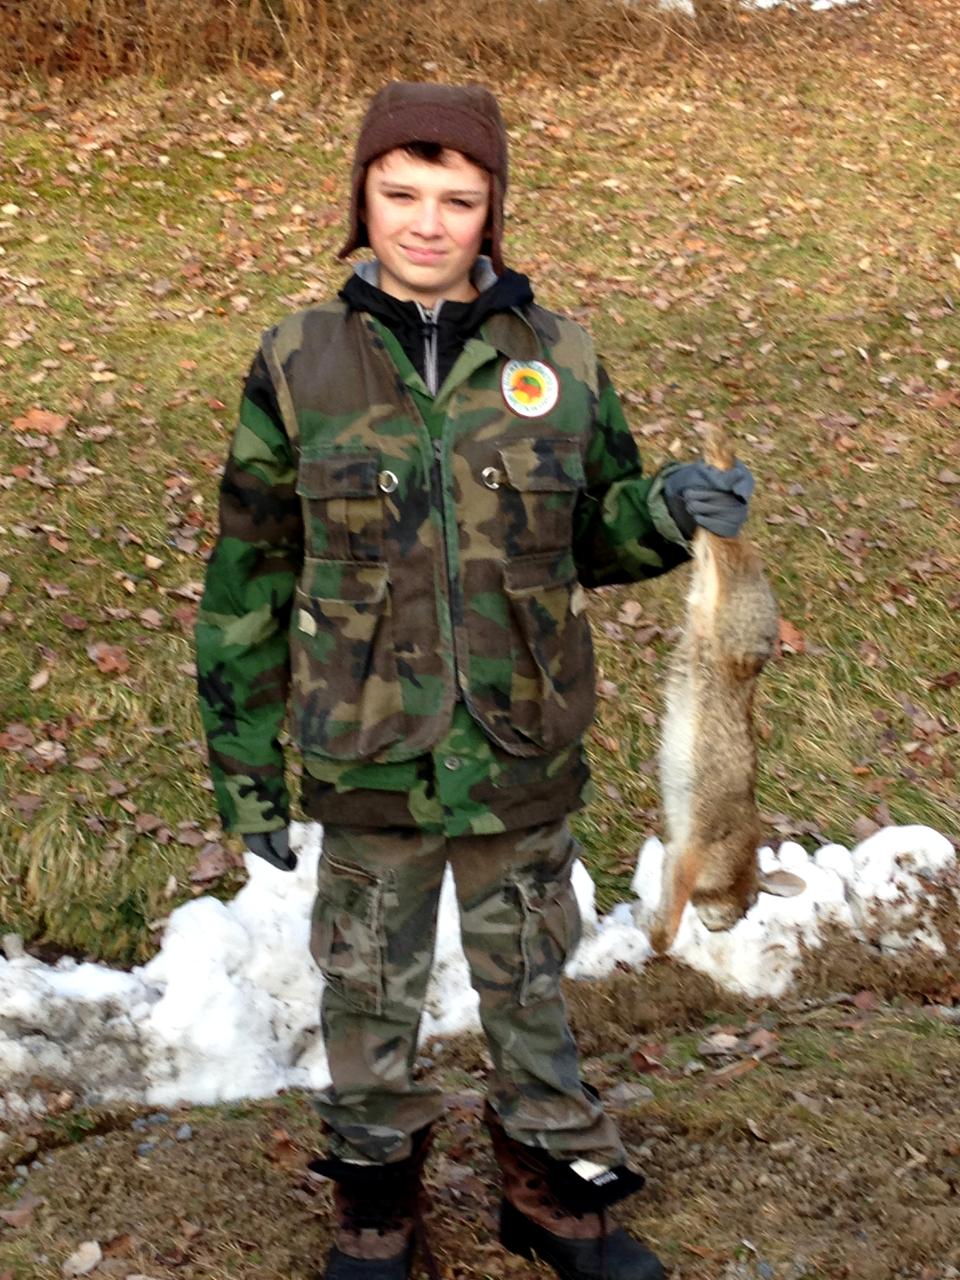 Holden with his first rabbit.